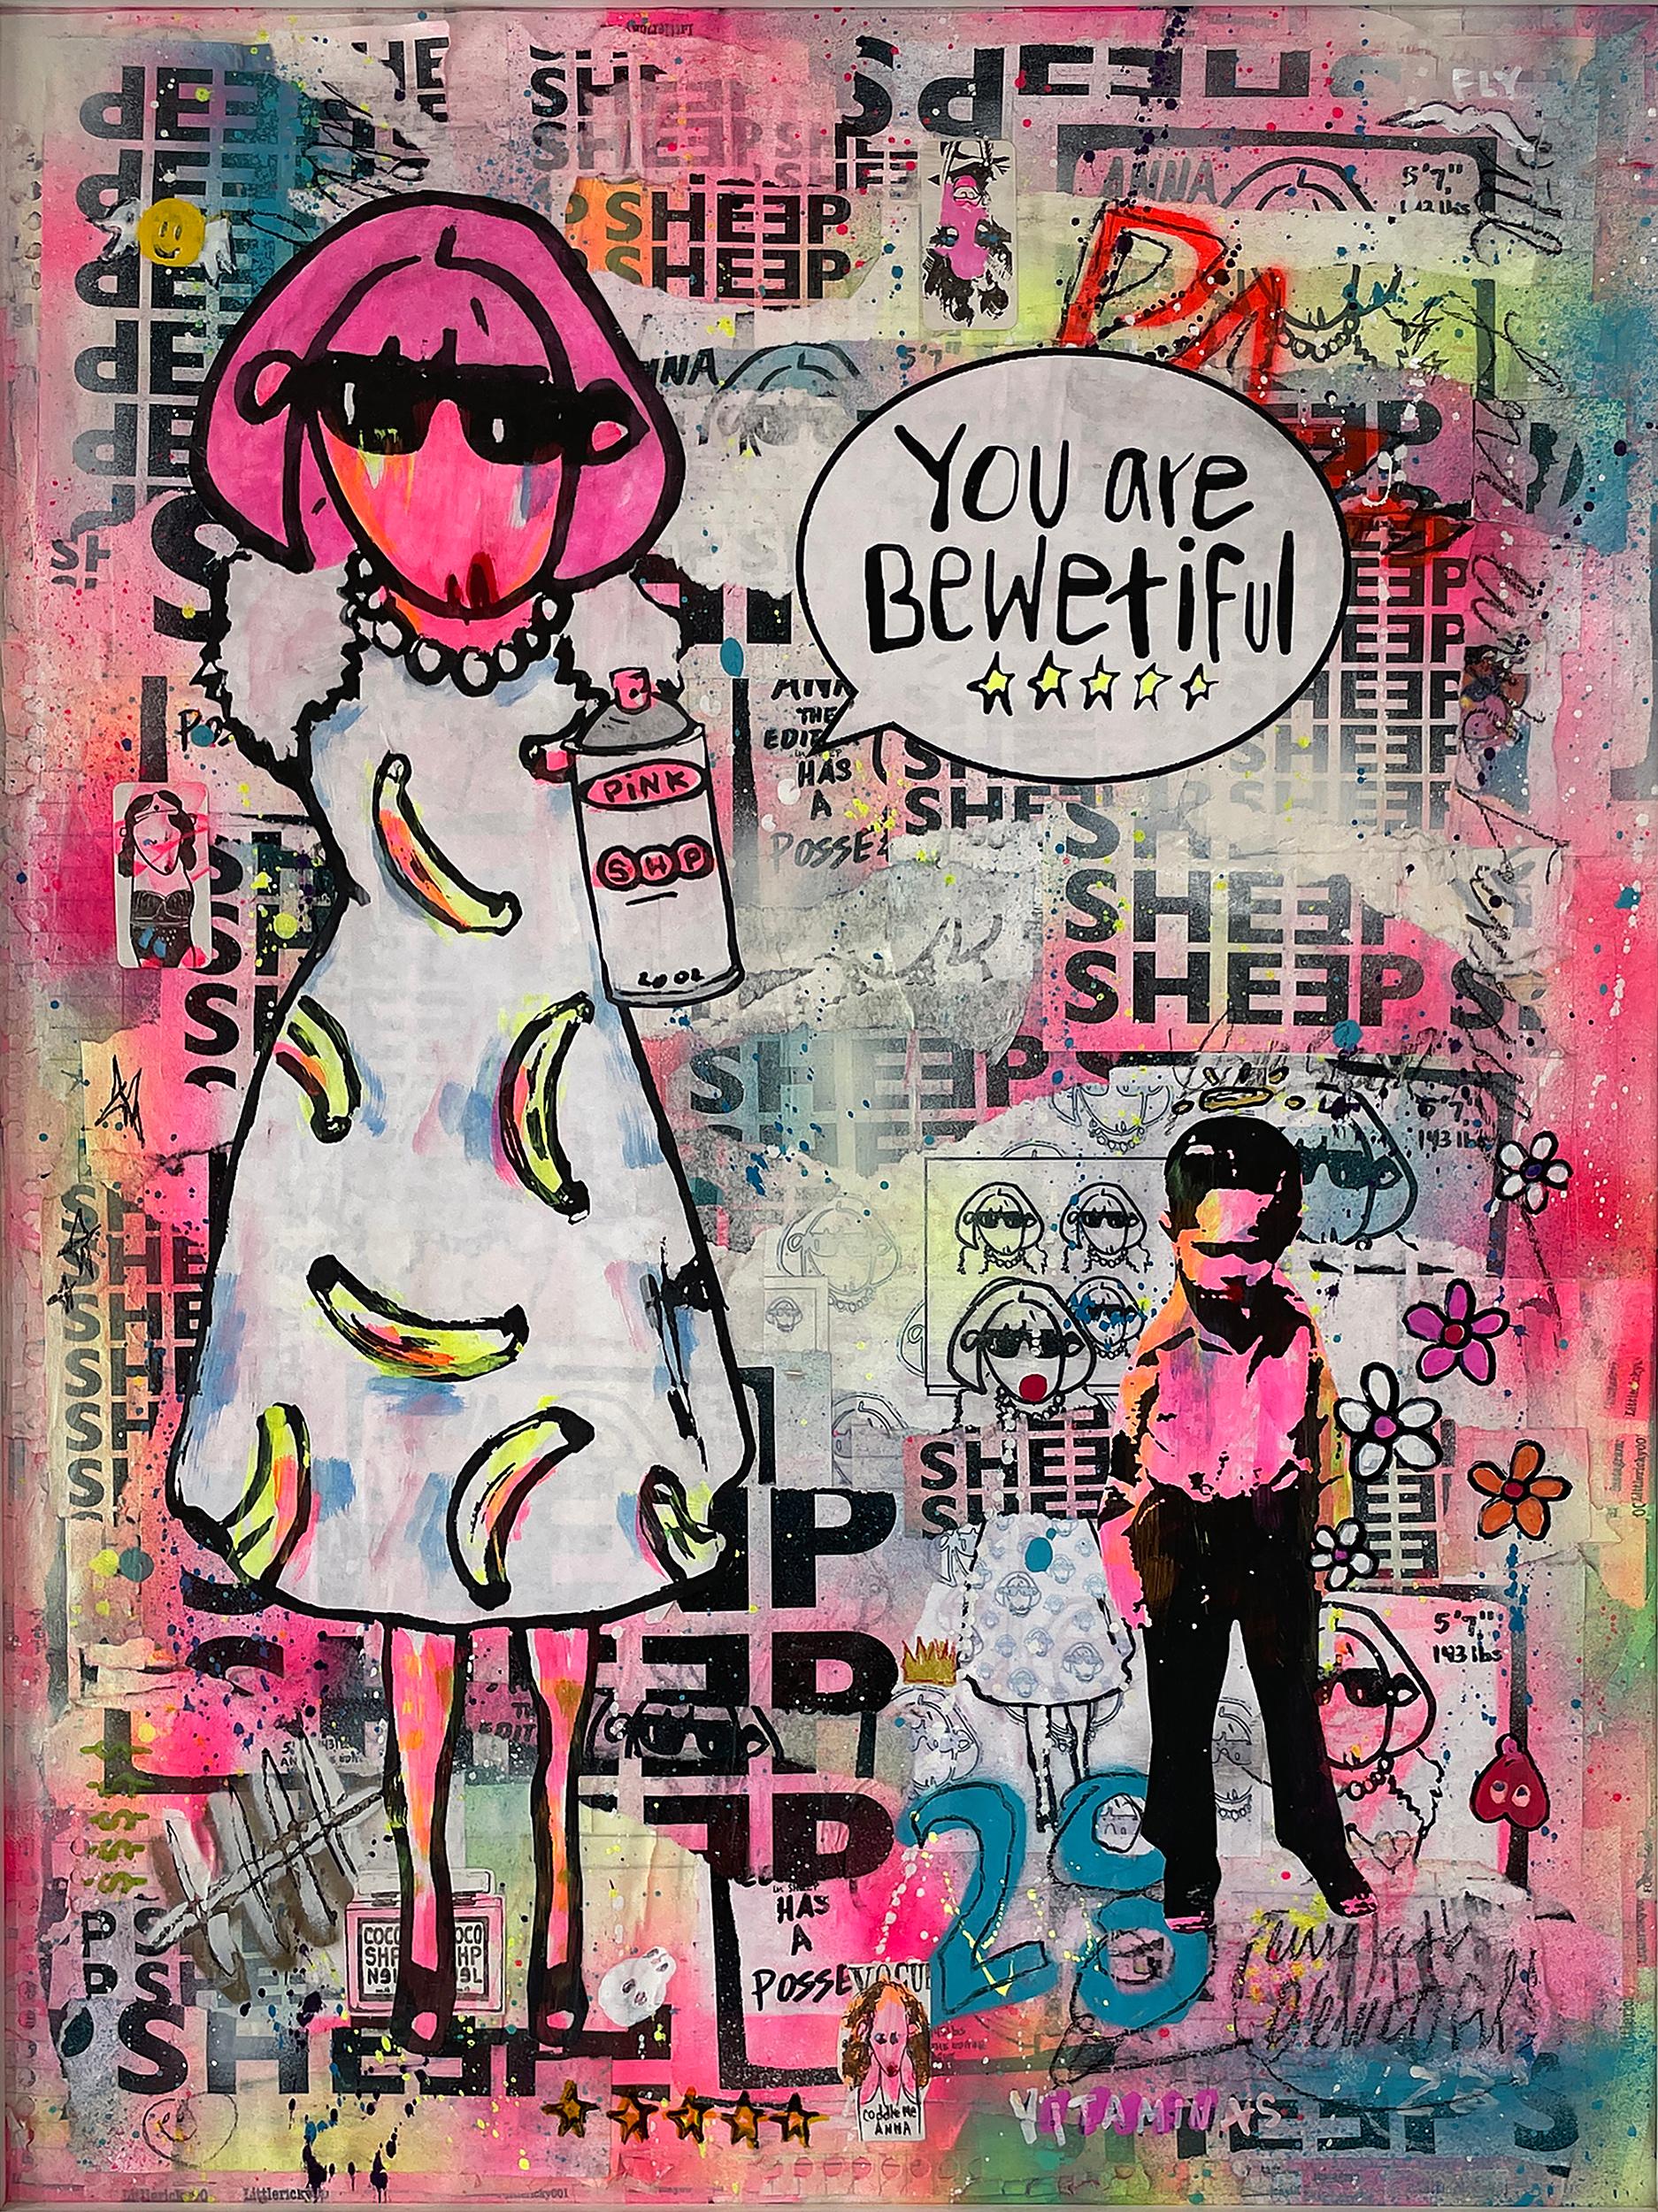 You are Bewetiful - mixed media on cardboard - Painting by Little Ricky